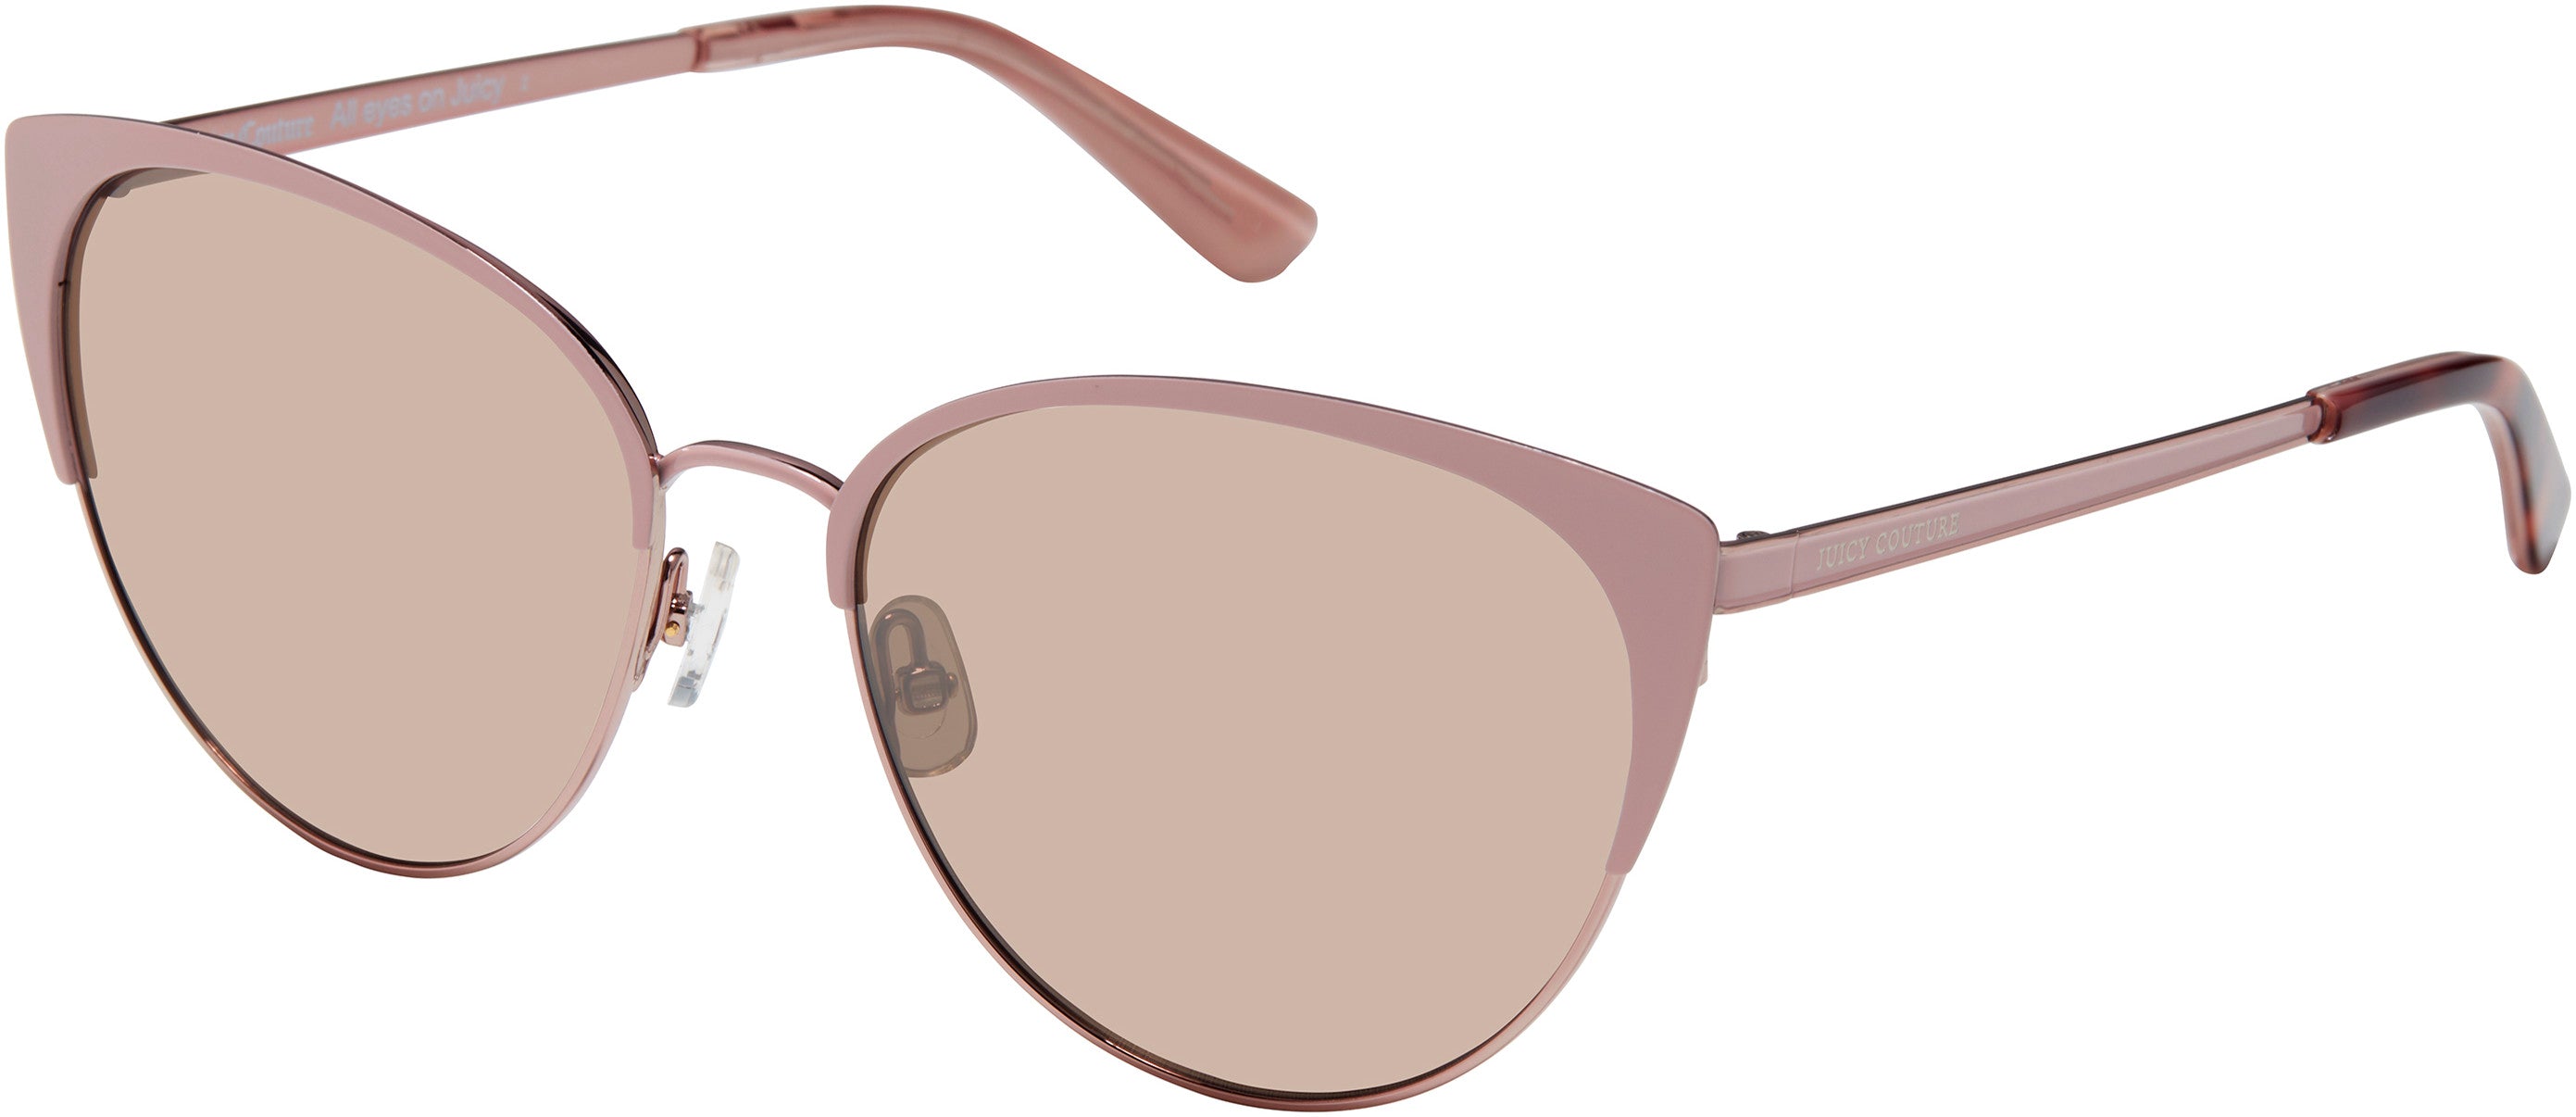 Juicy Couture Juicy 612/G/S Cat Eye/butterfly Sunglasses 035J-035J  Pink (G4 Silver Mirror Shaded Brown)